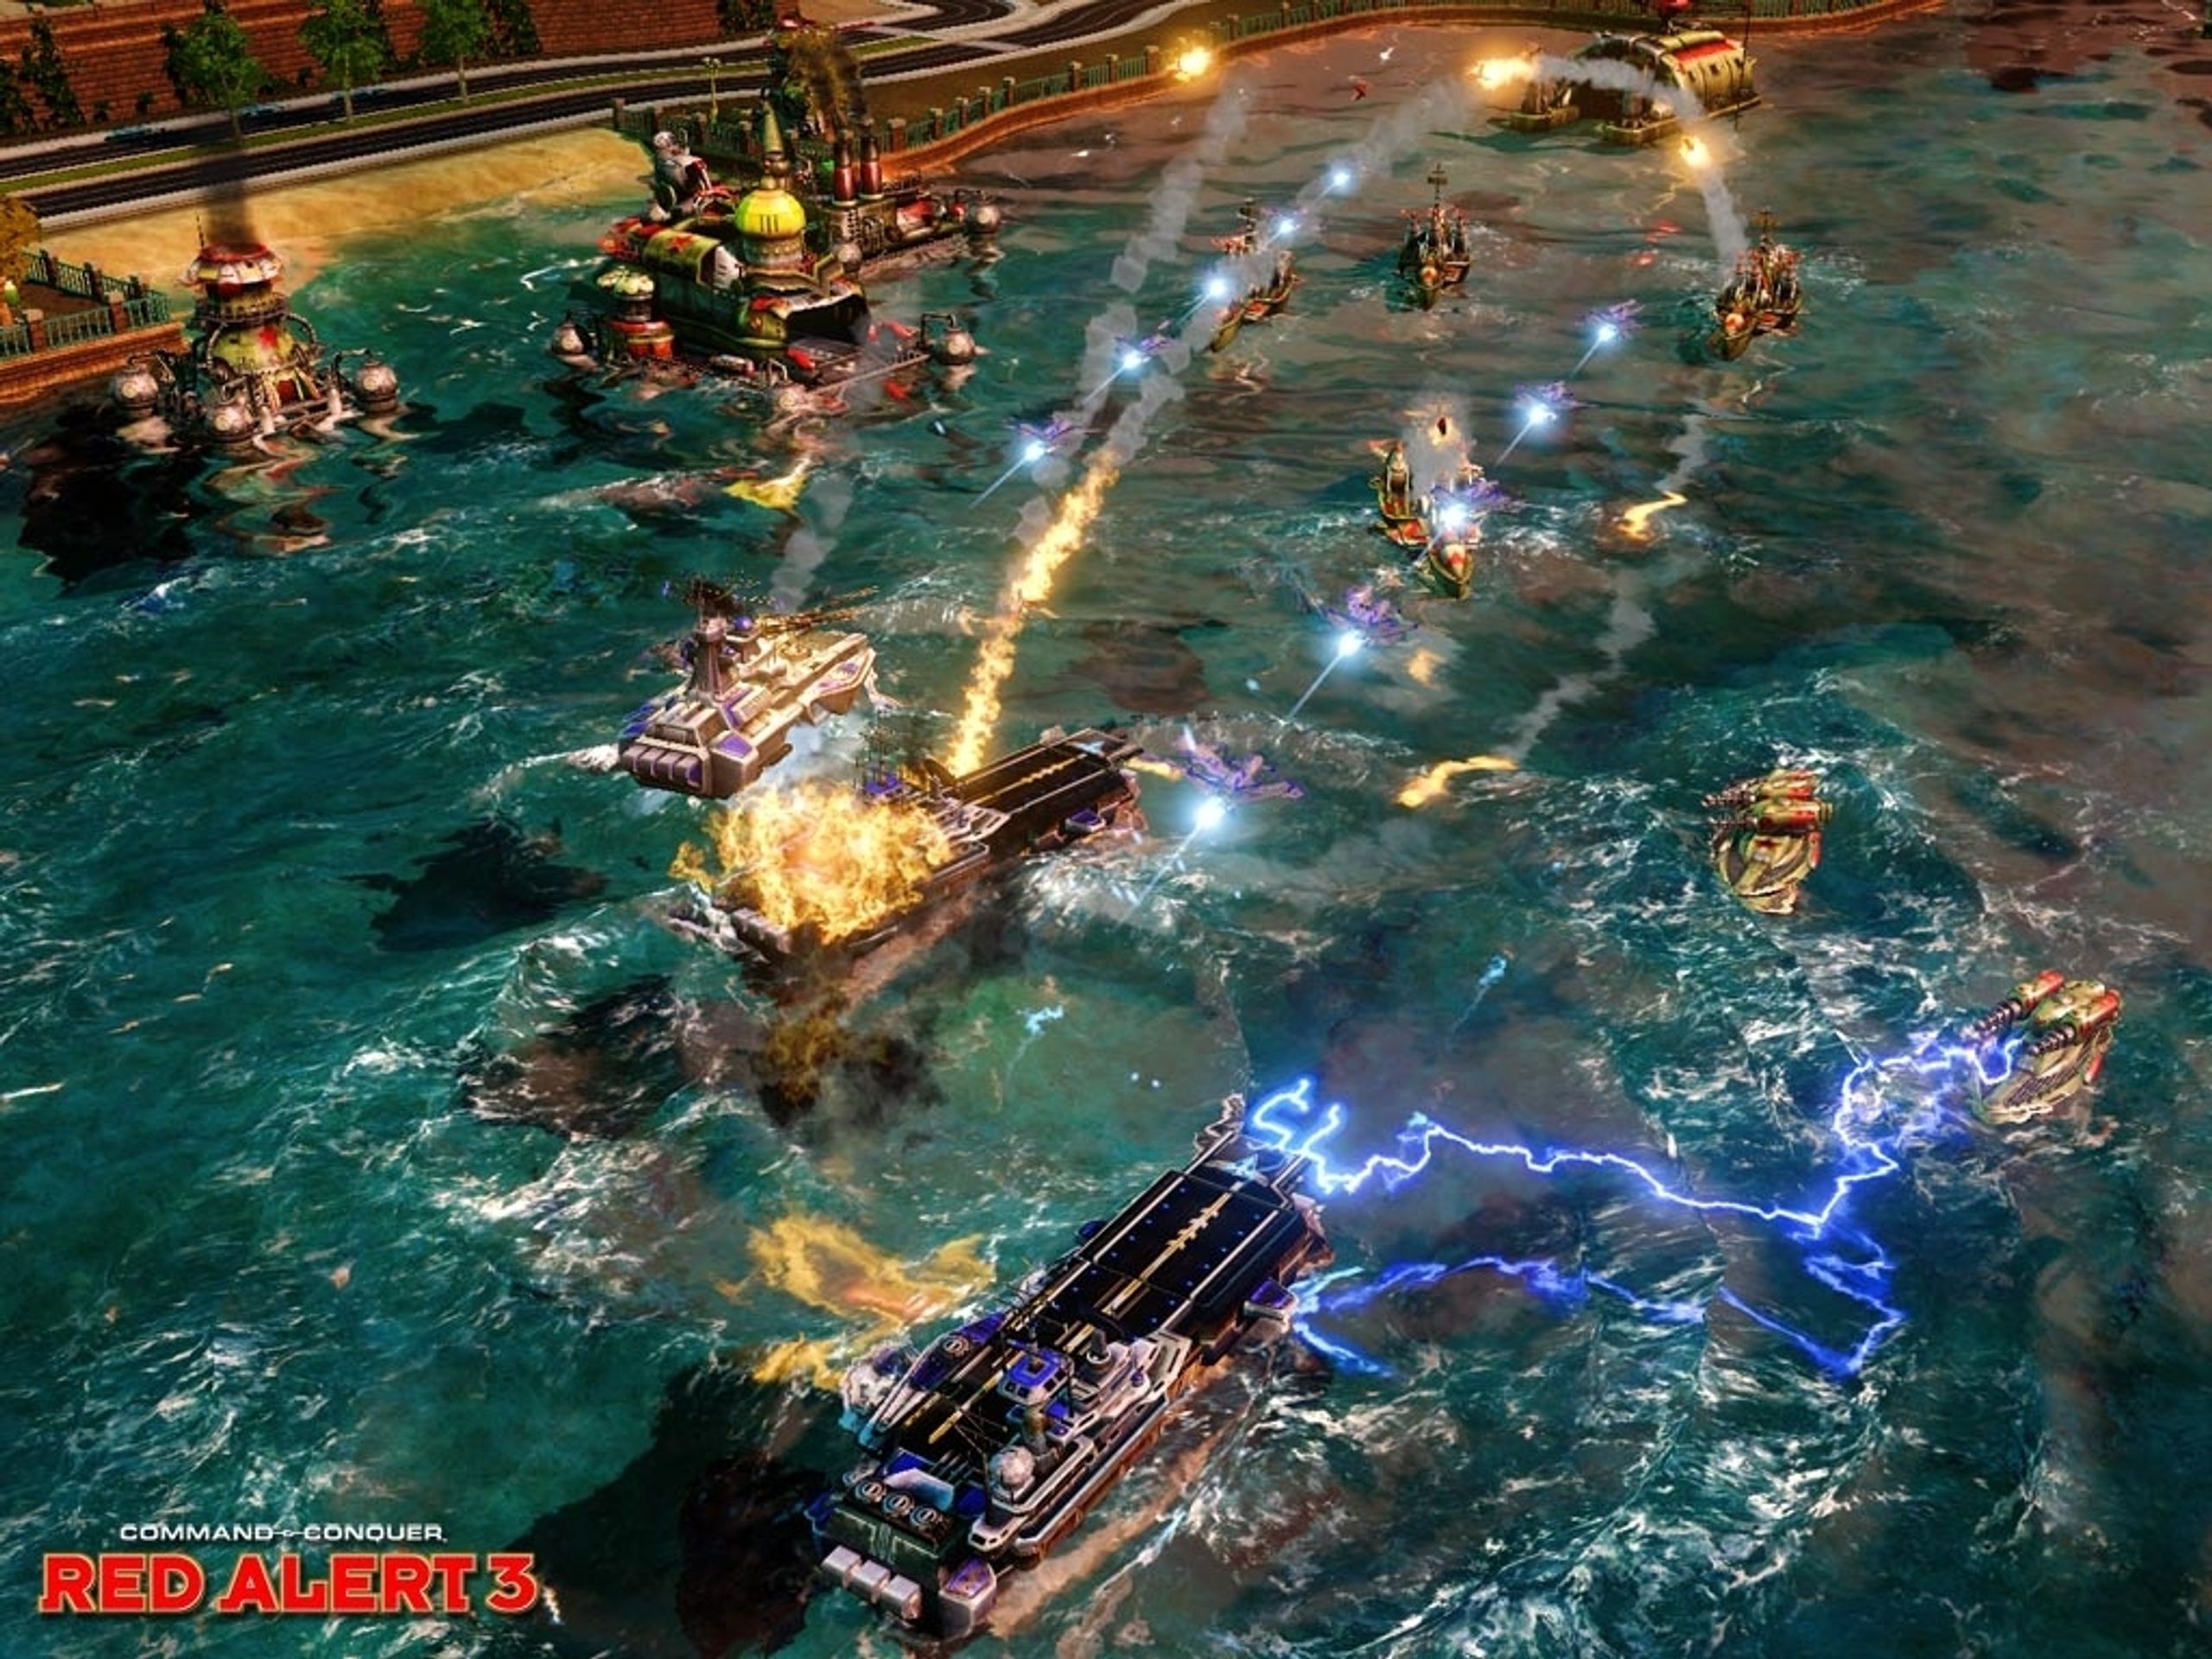 Command & Conquer: Red Alert 3 - Red Alert 3 galerie (13/16)